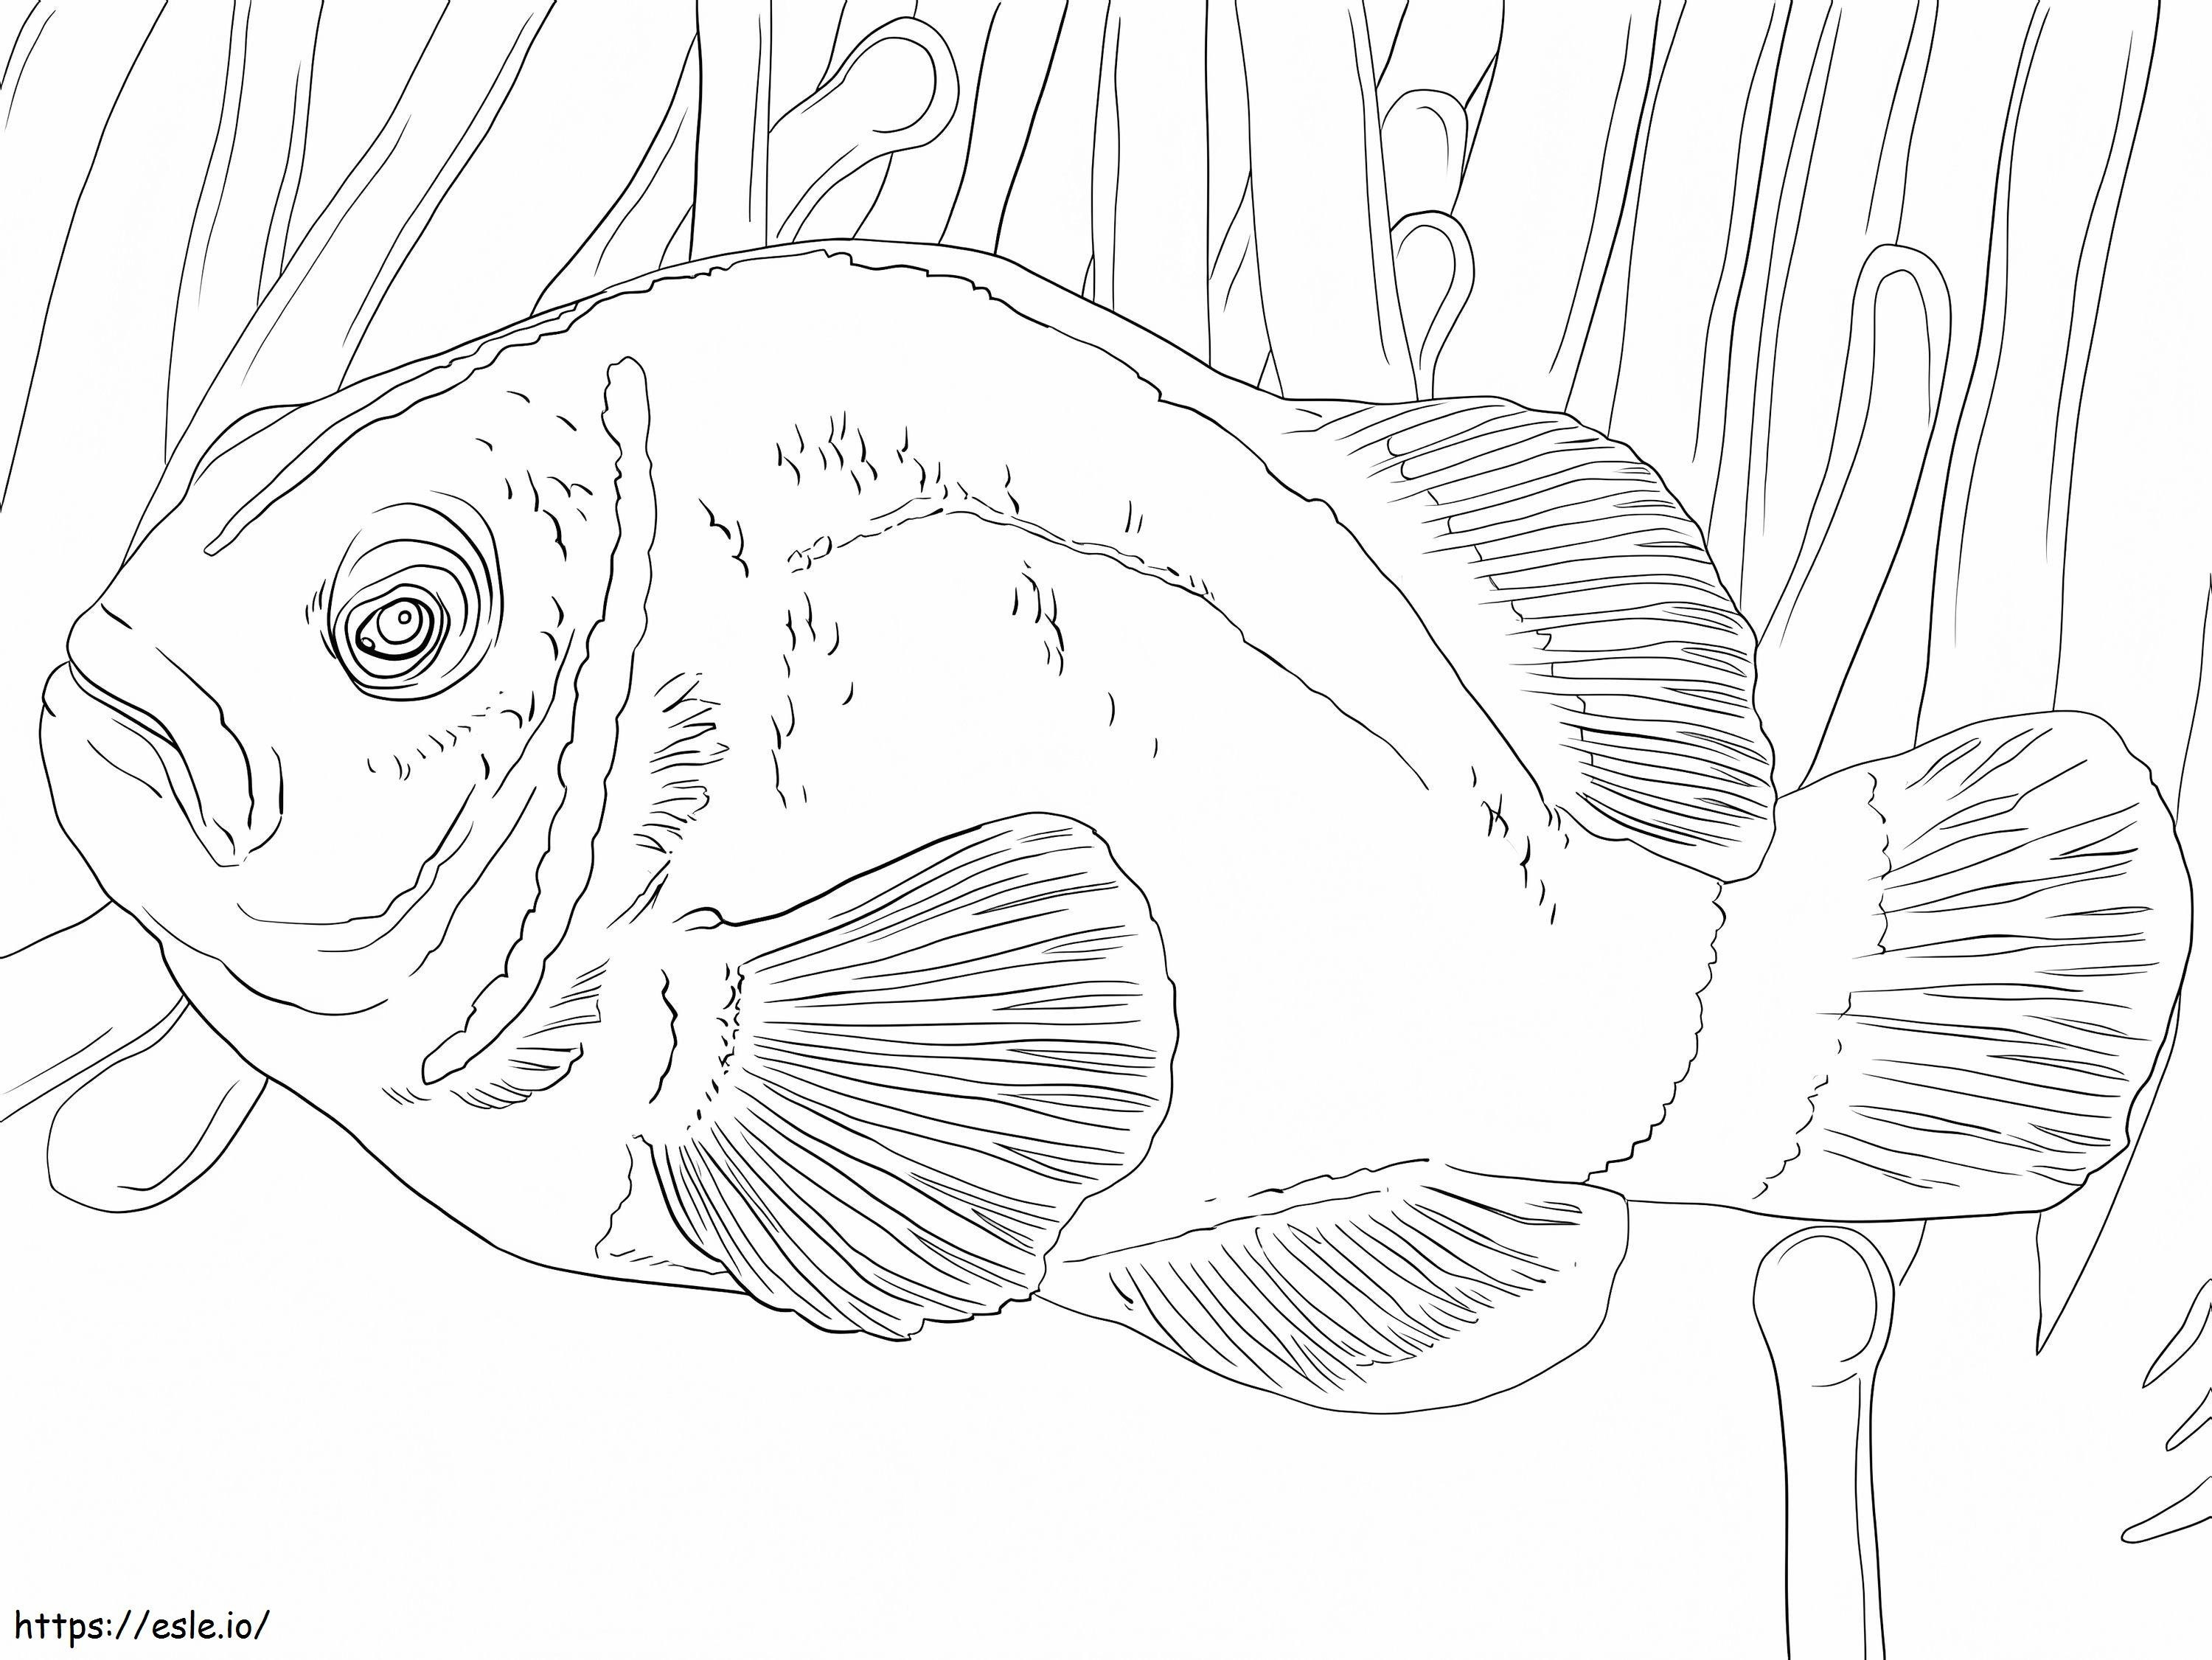 Pink Skunk Clownfish 1 coloring page